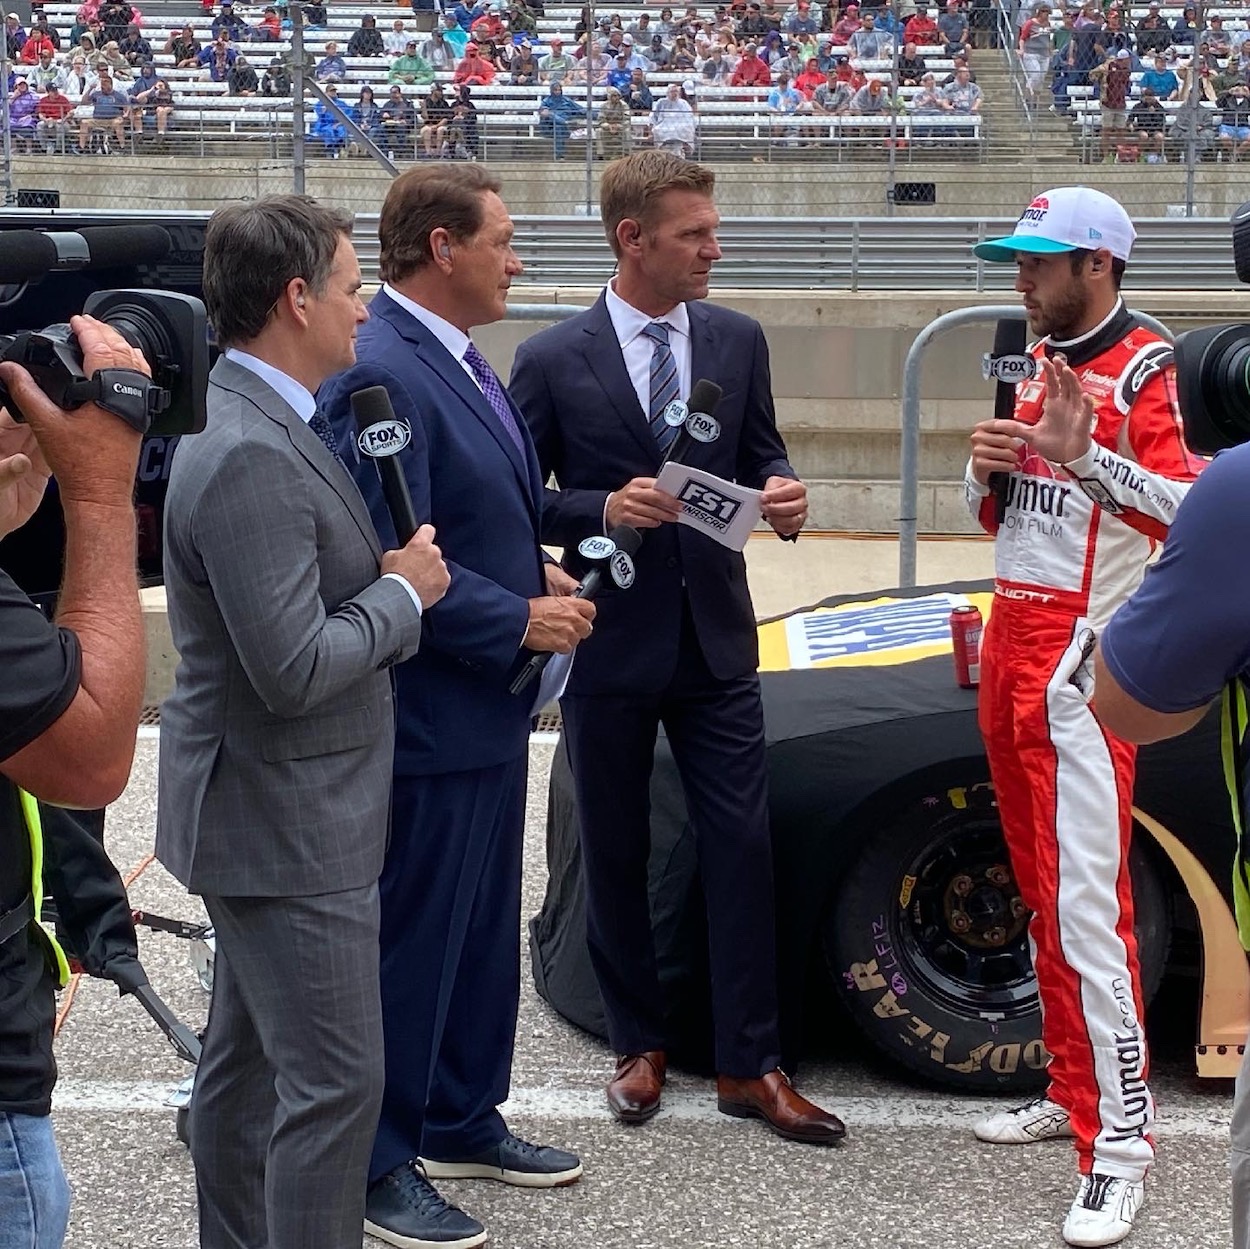 Clint Bowyer and Jeff Gordon visit with Chase Elliott before race at COTA